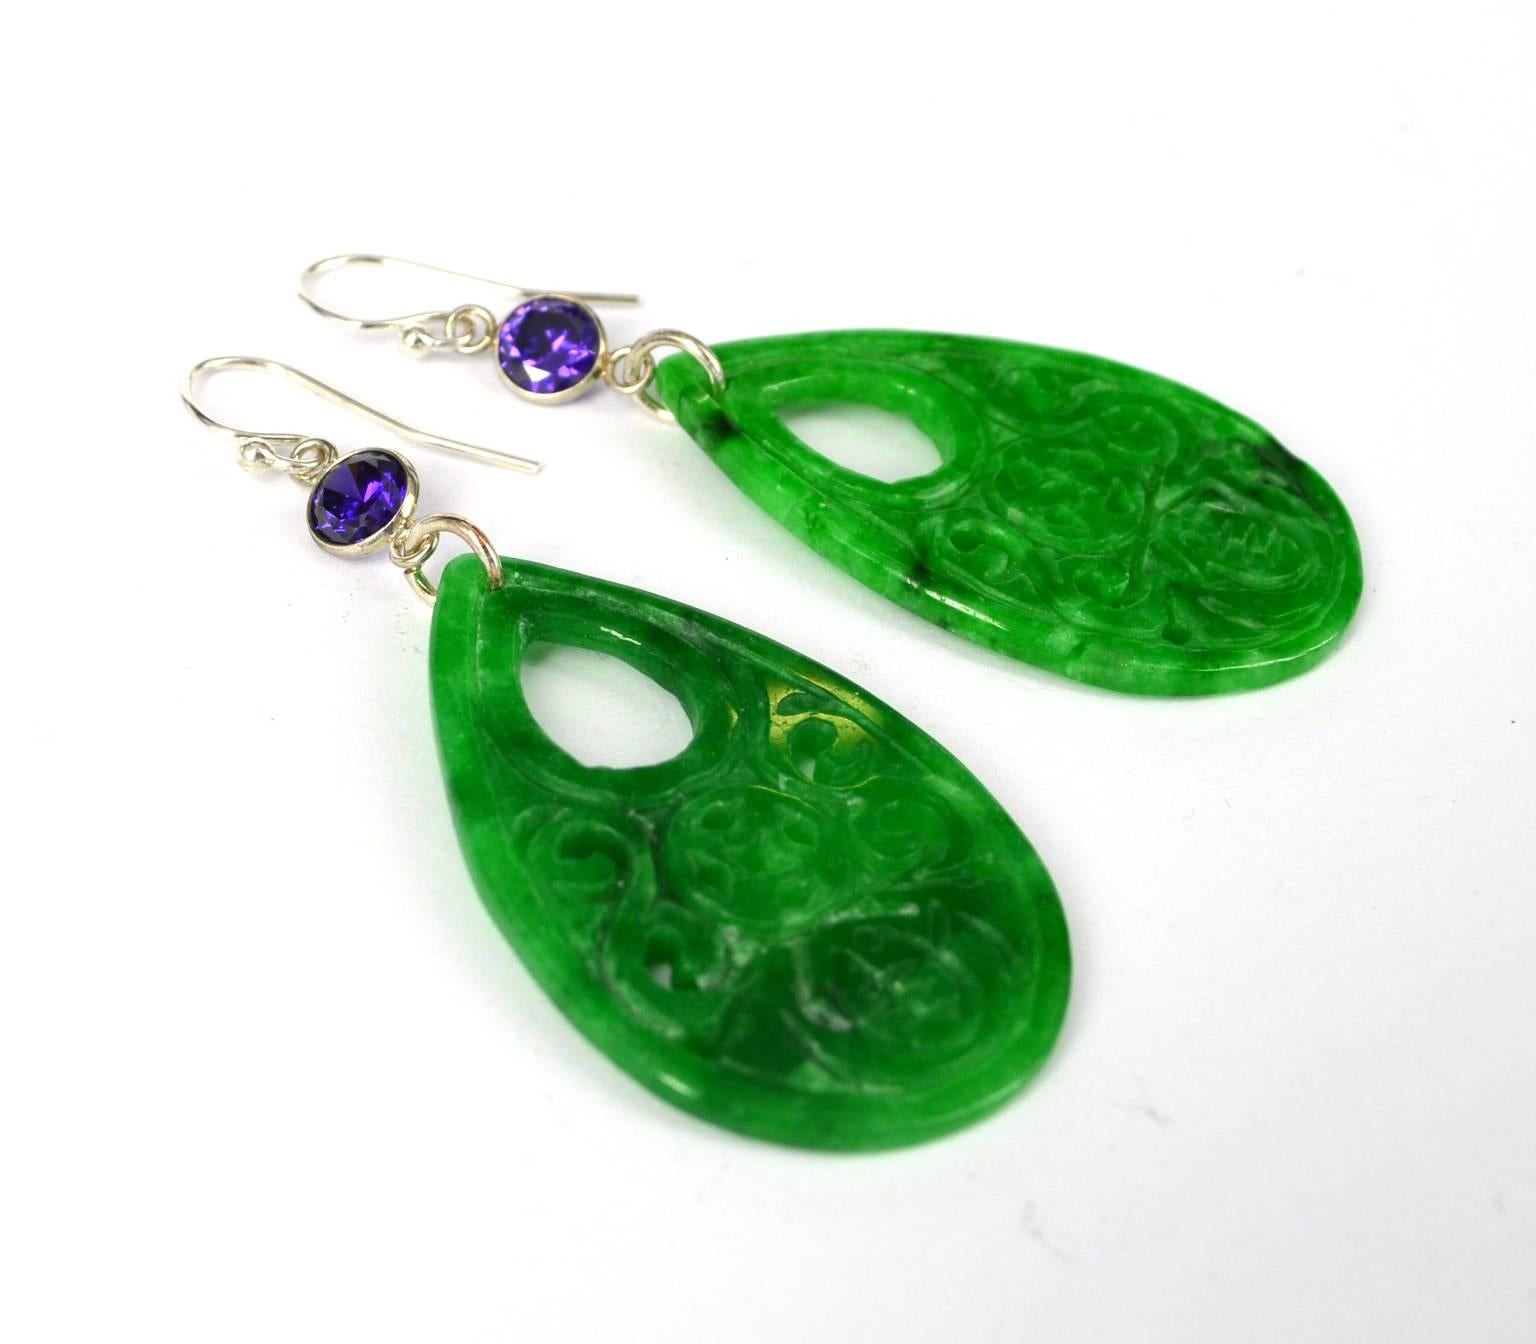 Carved Jade earrings with Sterling Silver Amethyst CZ connectors.
Jade is 25mm wide and 40mm long.
Earring hangs at 69mm 